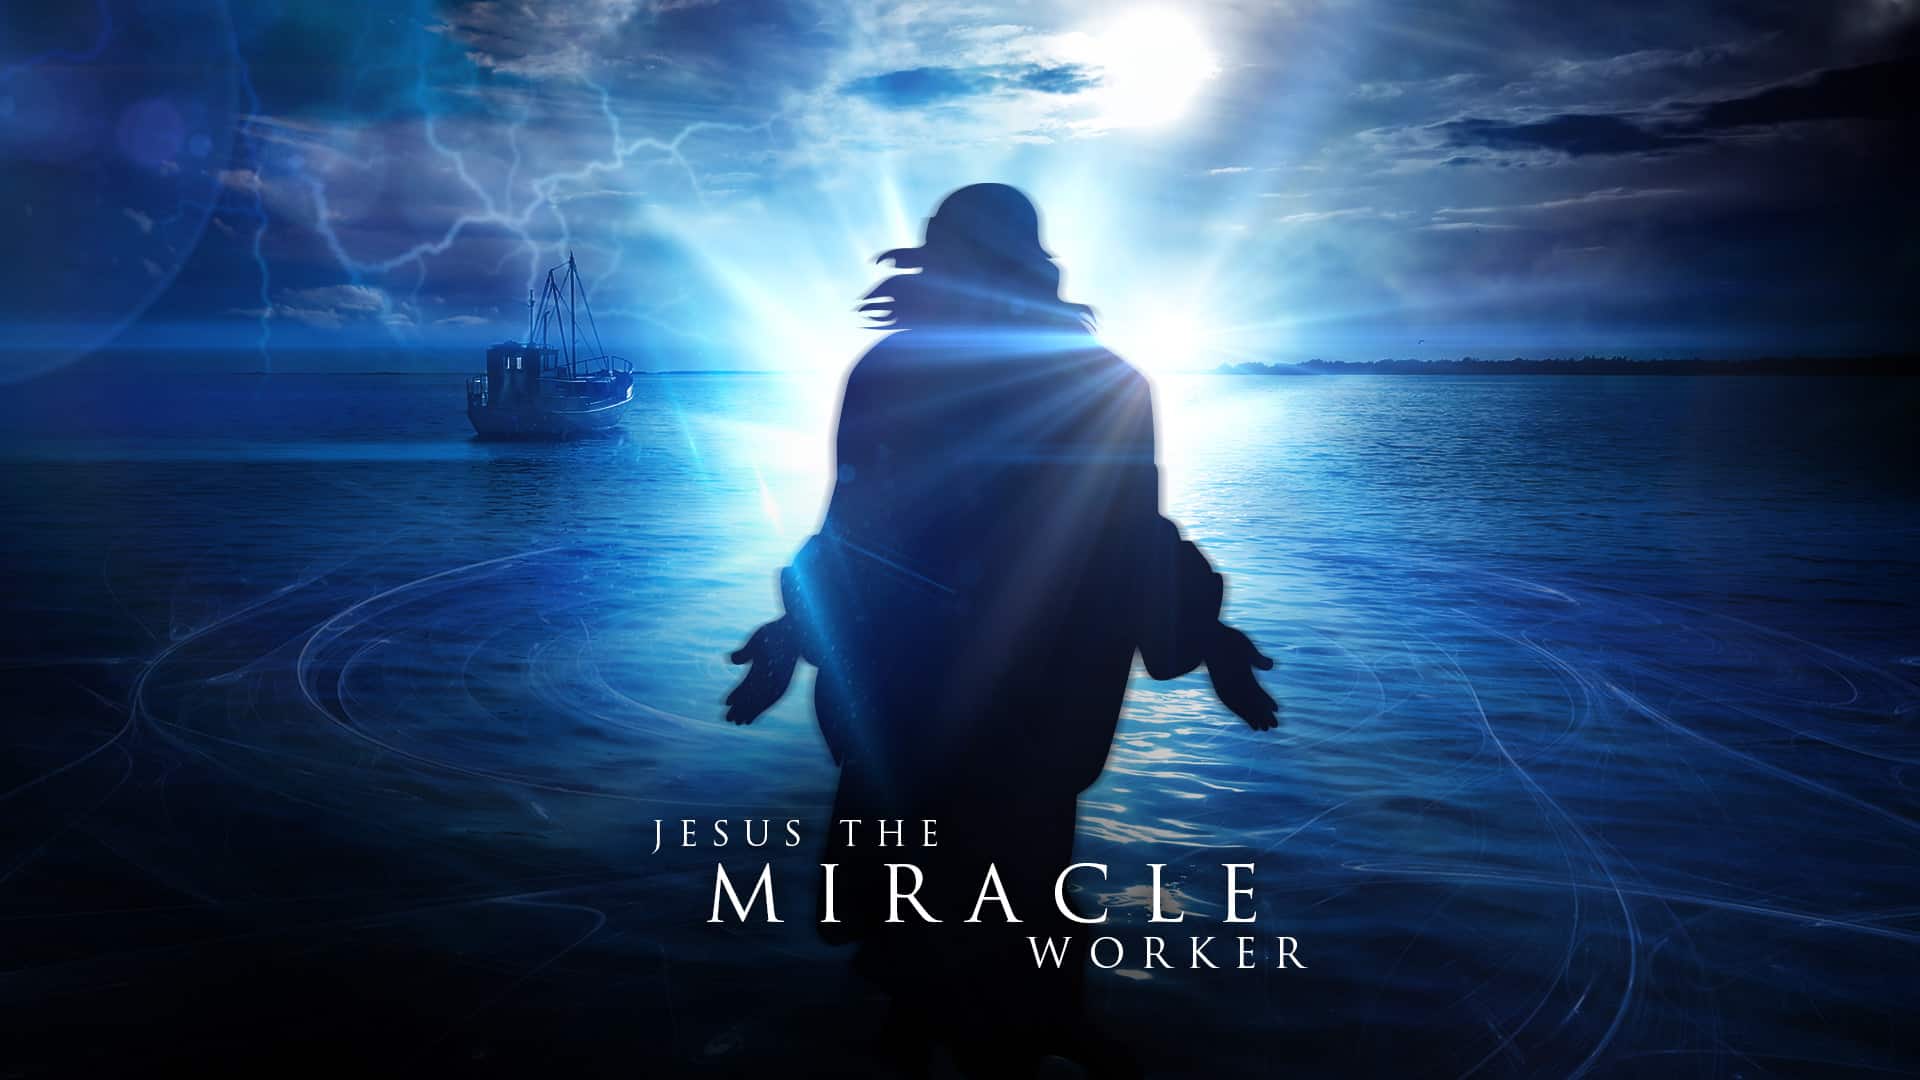 jesus_the_miracle_worker-title-1-Wide 16x9